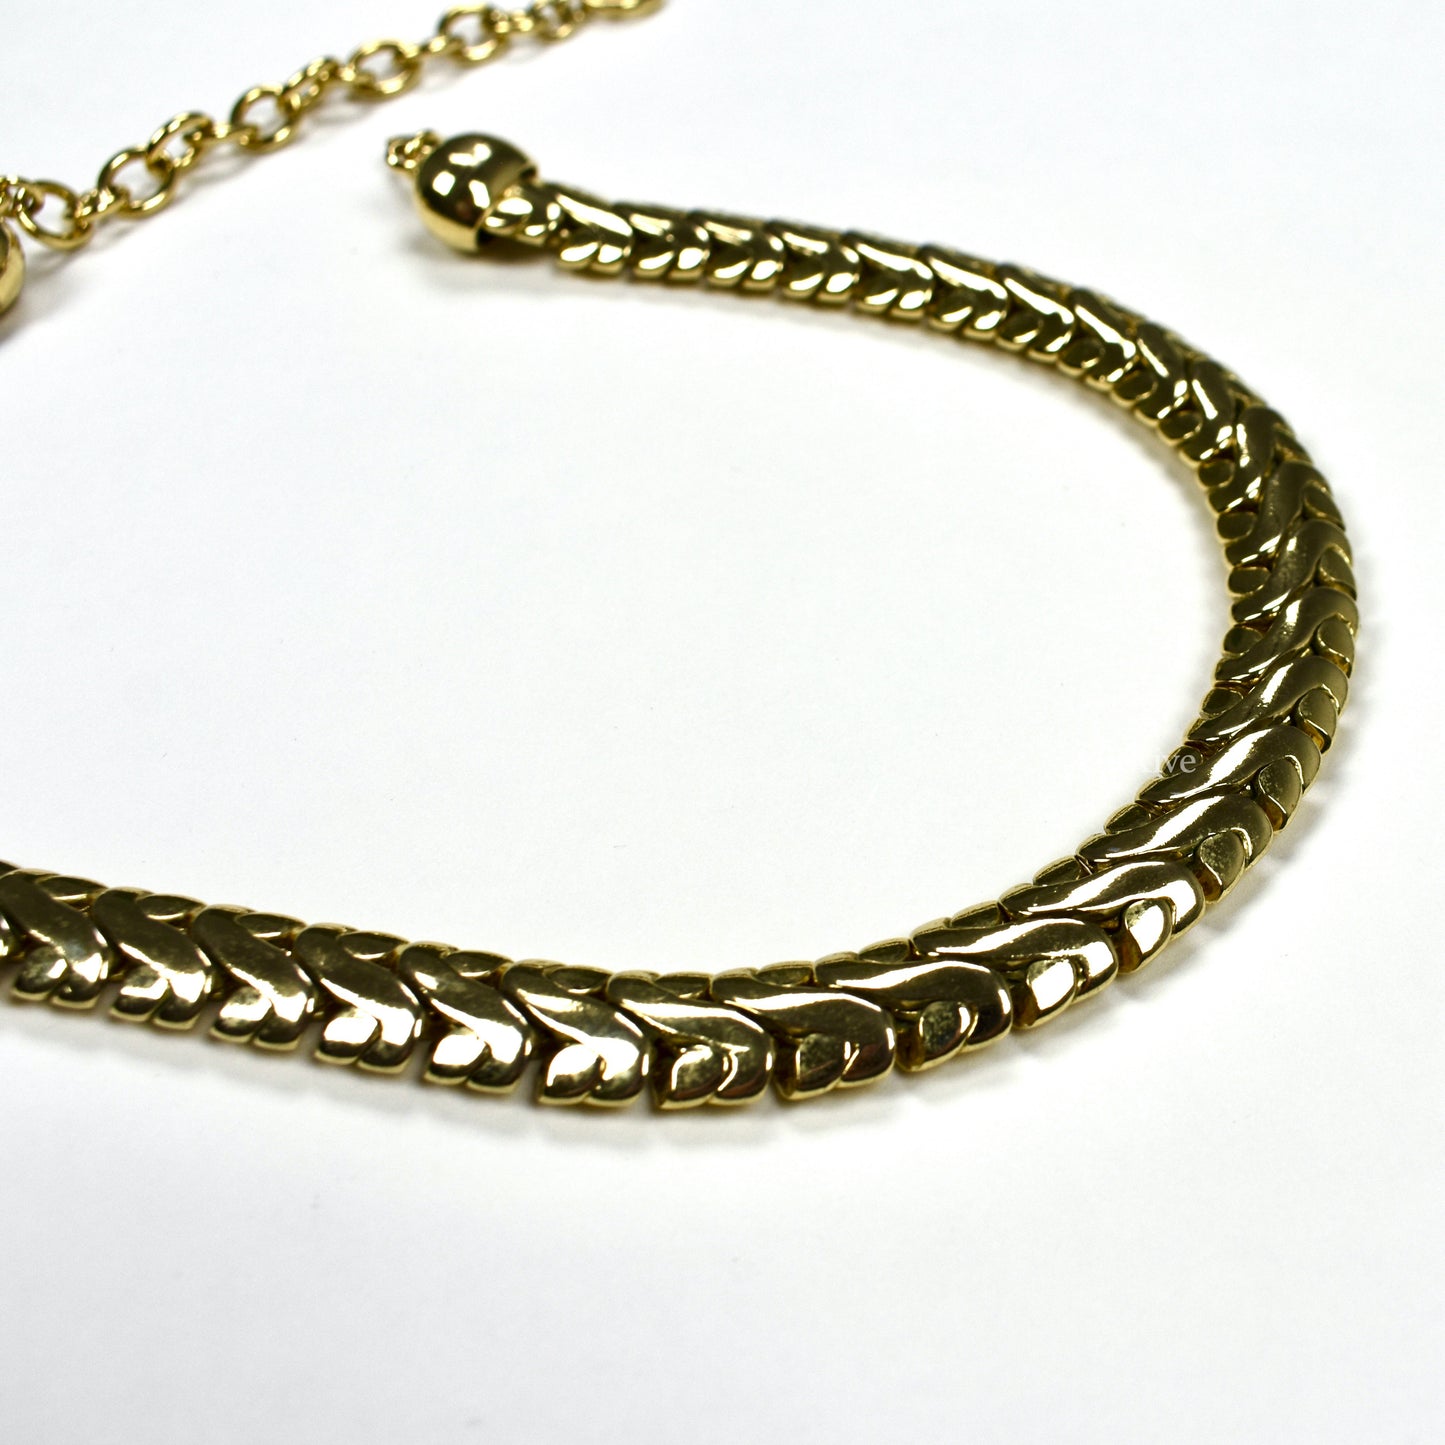 Givenchy - 18.5" Gold S-Link Chain Necklace